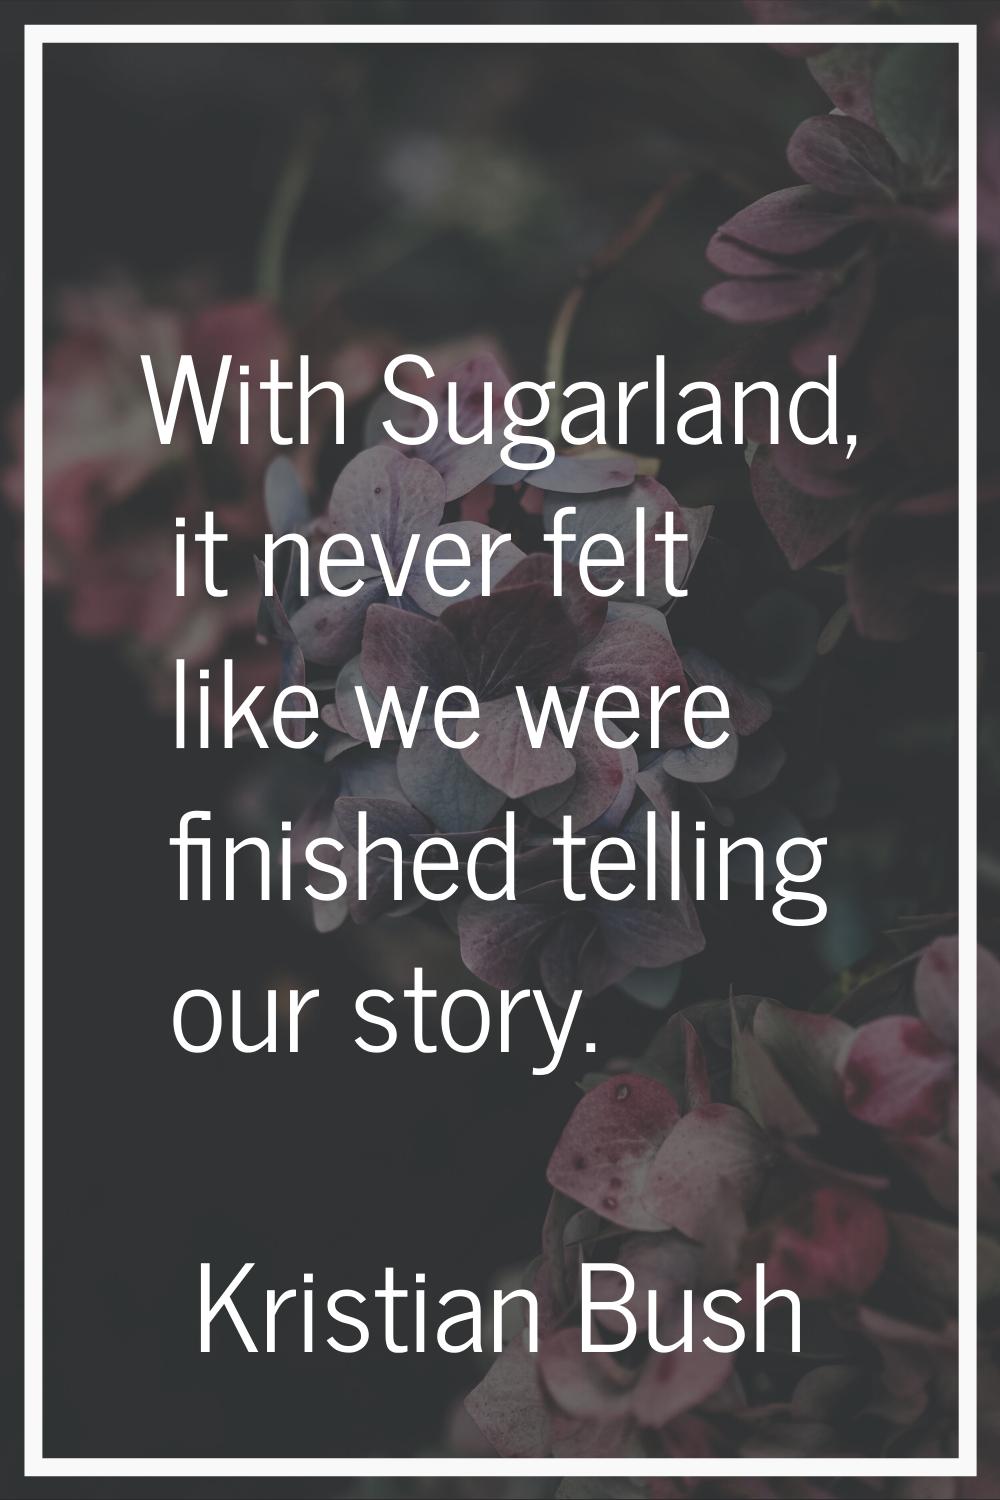 With Sugarland, it never felt like we were finished telling our story.